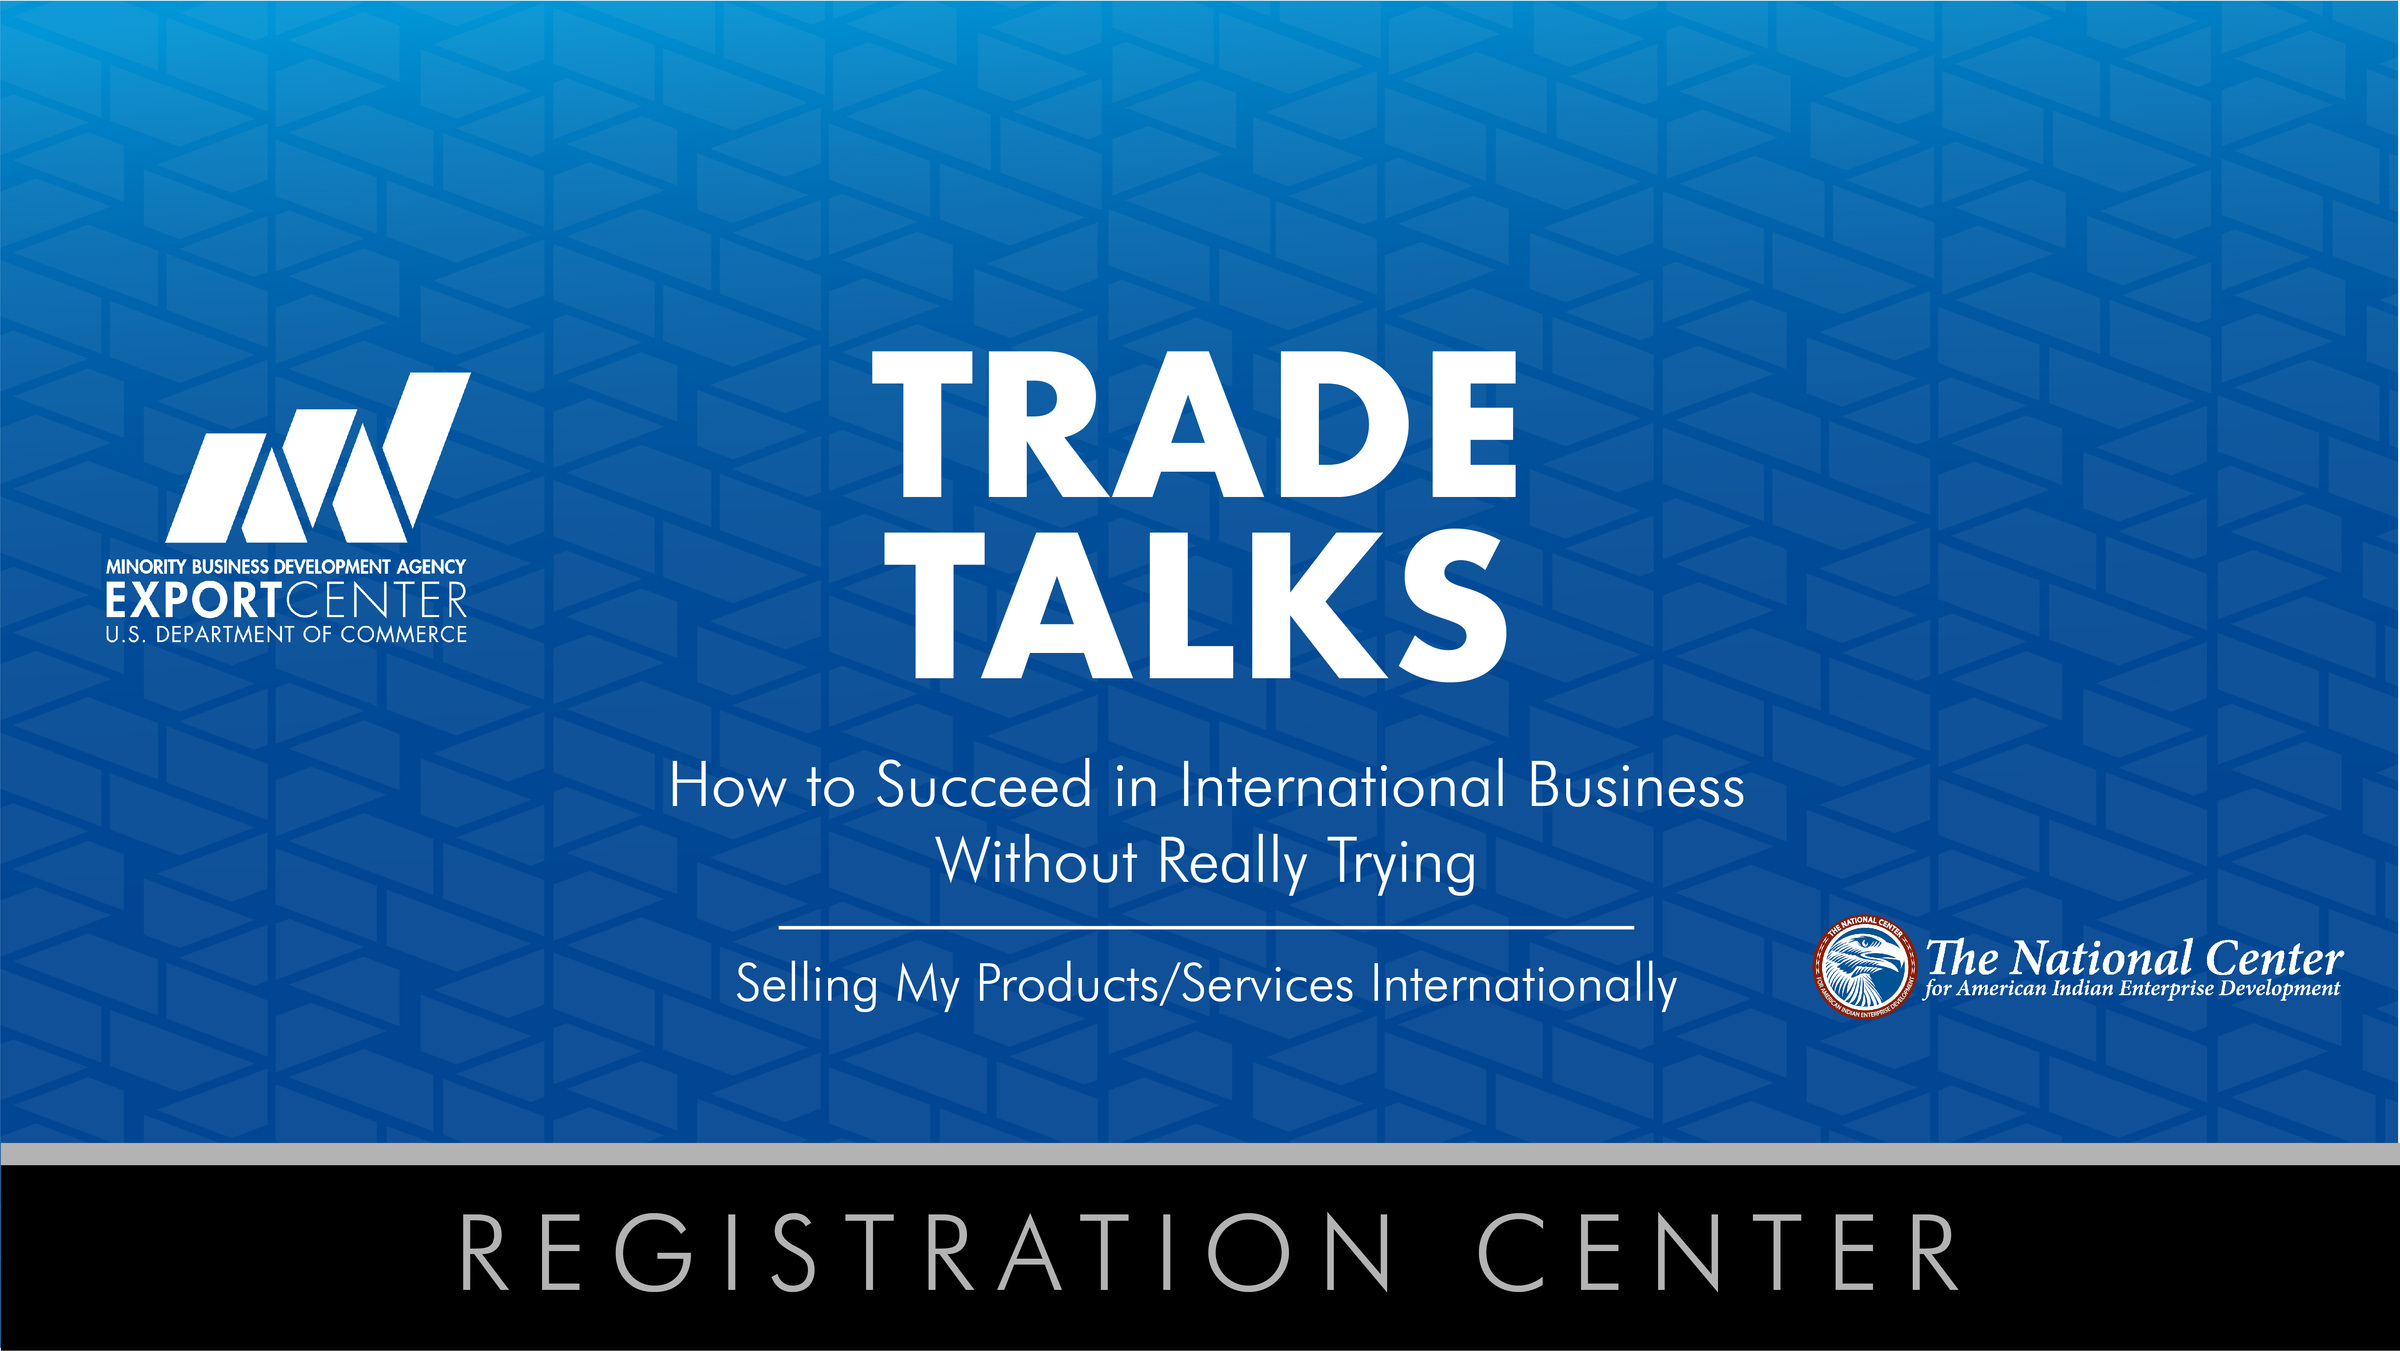 Trade Talks: How to Succeed in International Business Without Really Trying - How to sell my products/services internationally